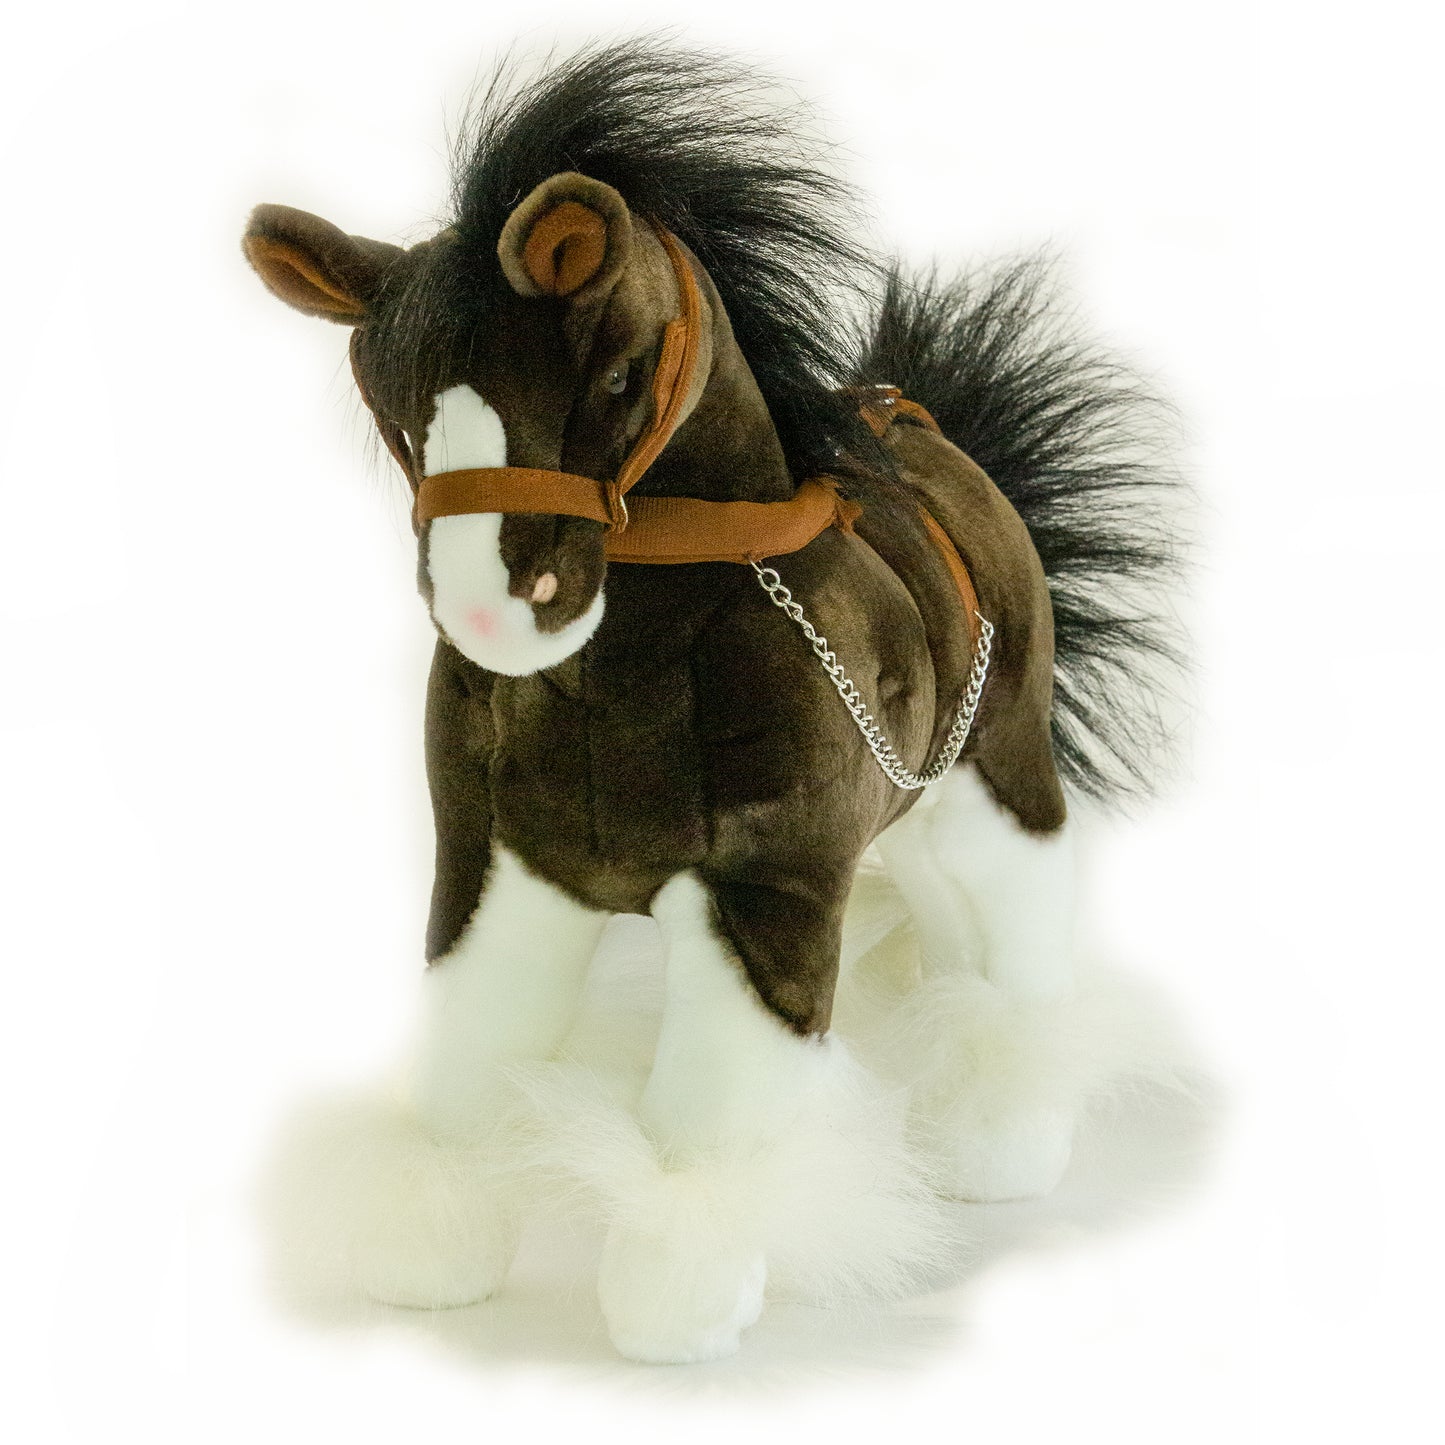 Rimsky – Clydesdale Horse Size 30cm/12″ Plush Toy